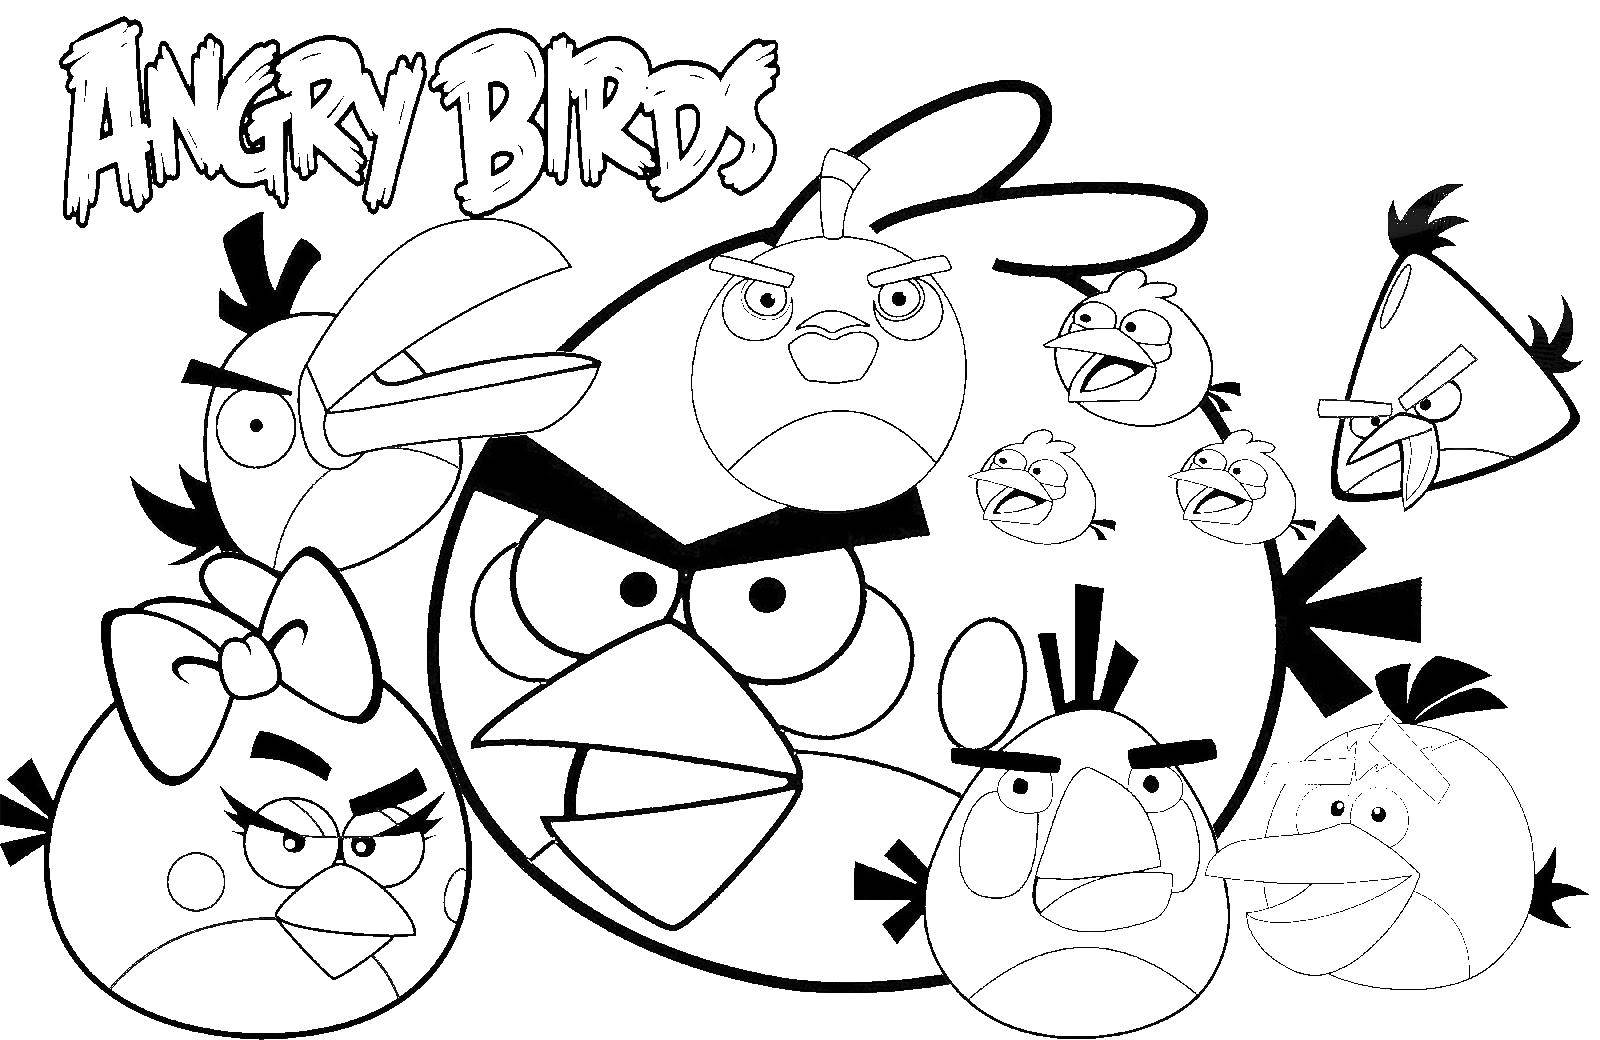 Coloring Angry birds game. Category angry birds. Tags:  angry birds, games, characters.